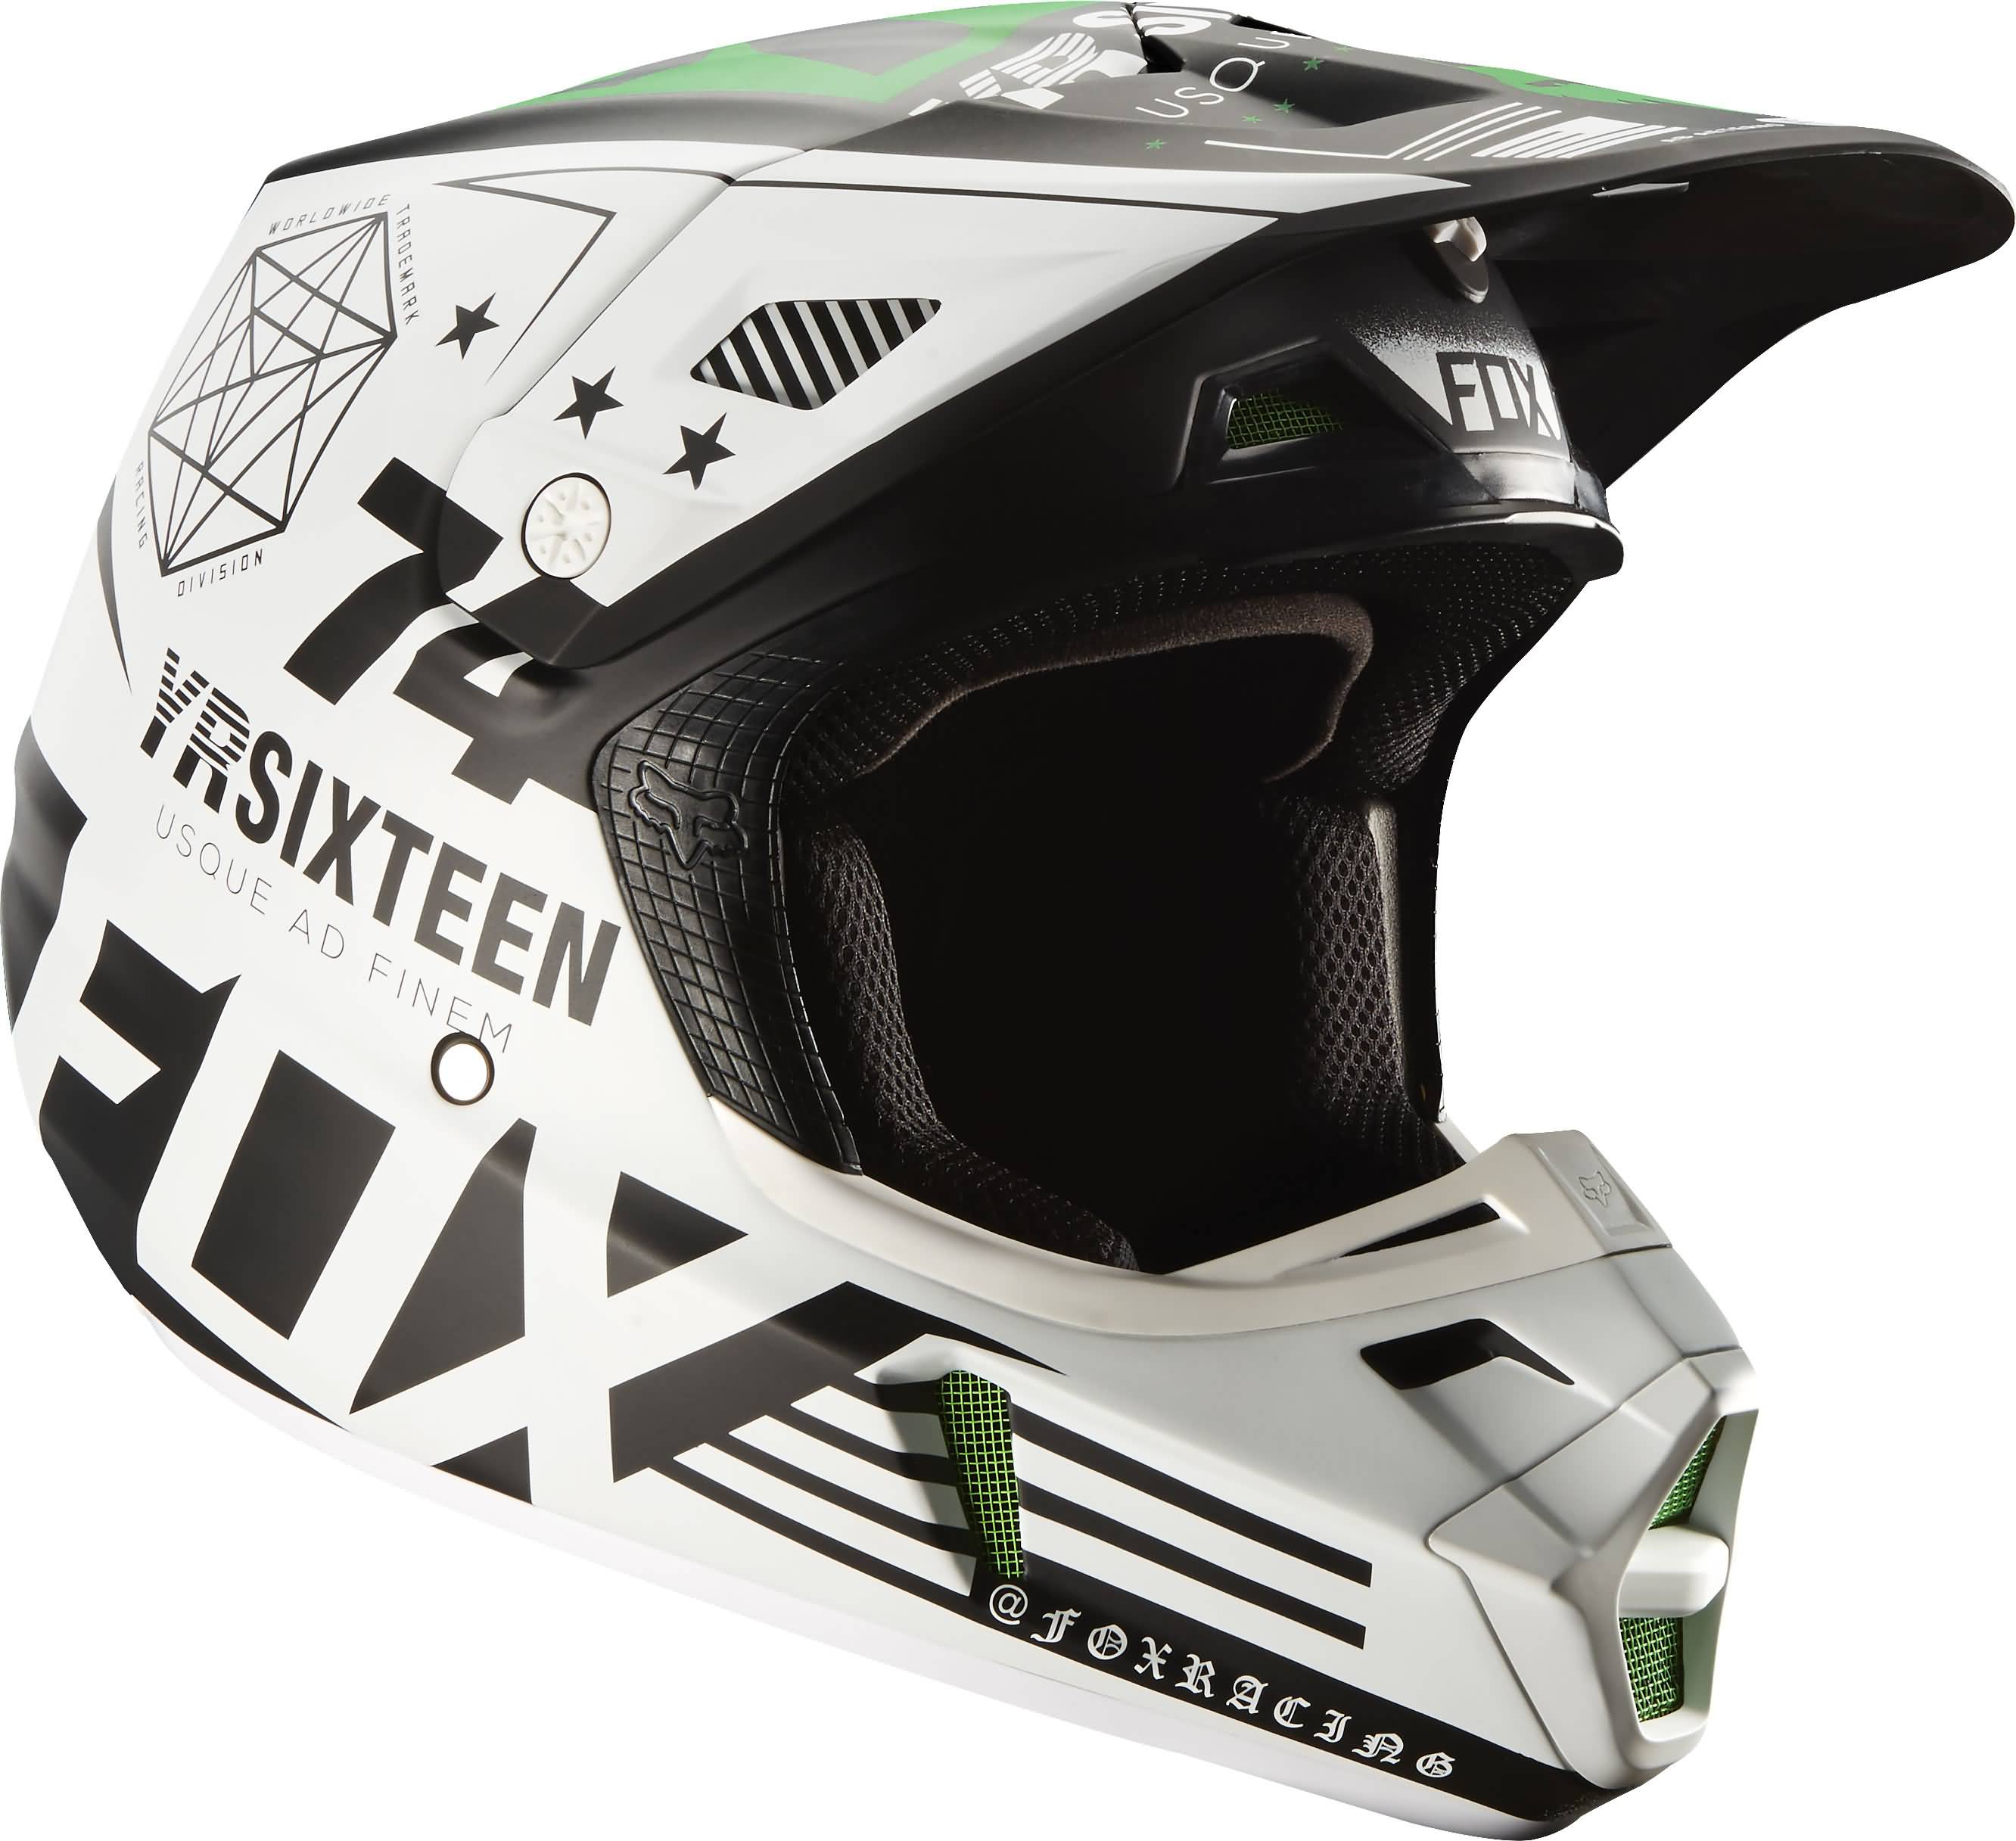 Fox Racing 180 Monster Pro Ciruit SE Motorcycle Gear Fall 2016 Overview